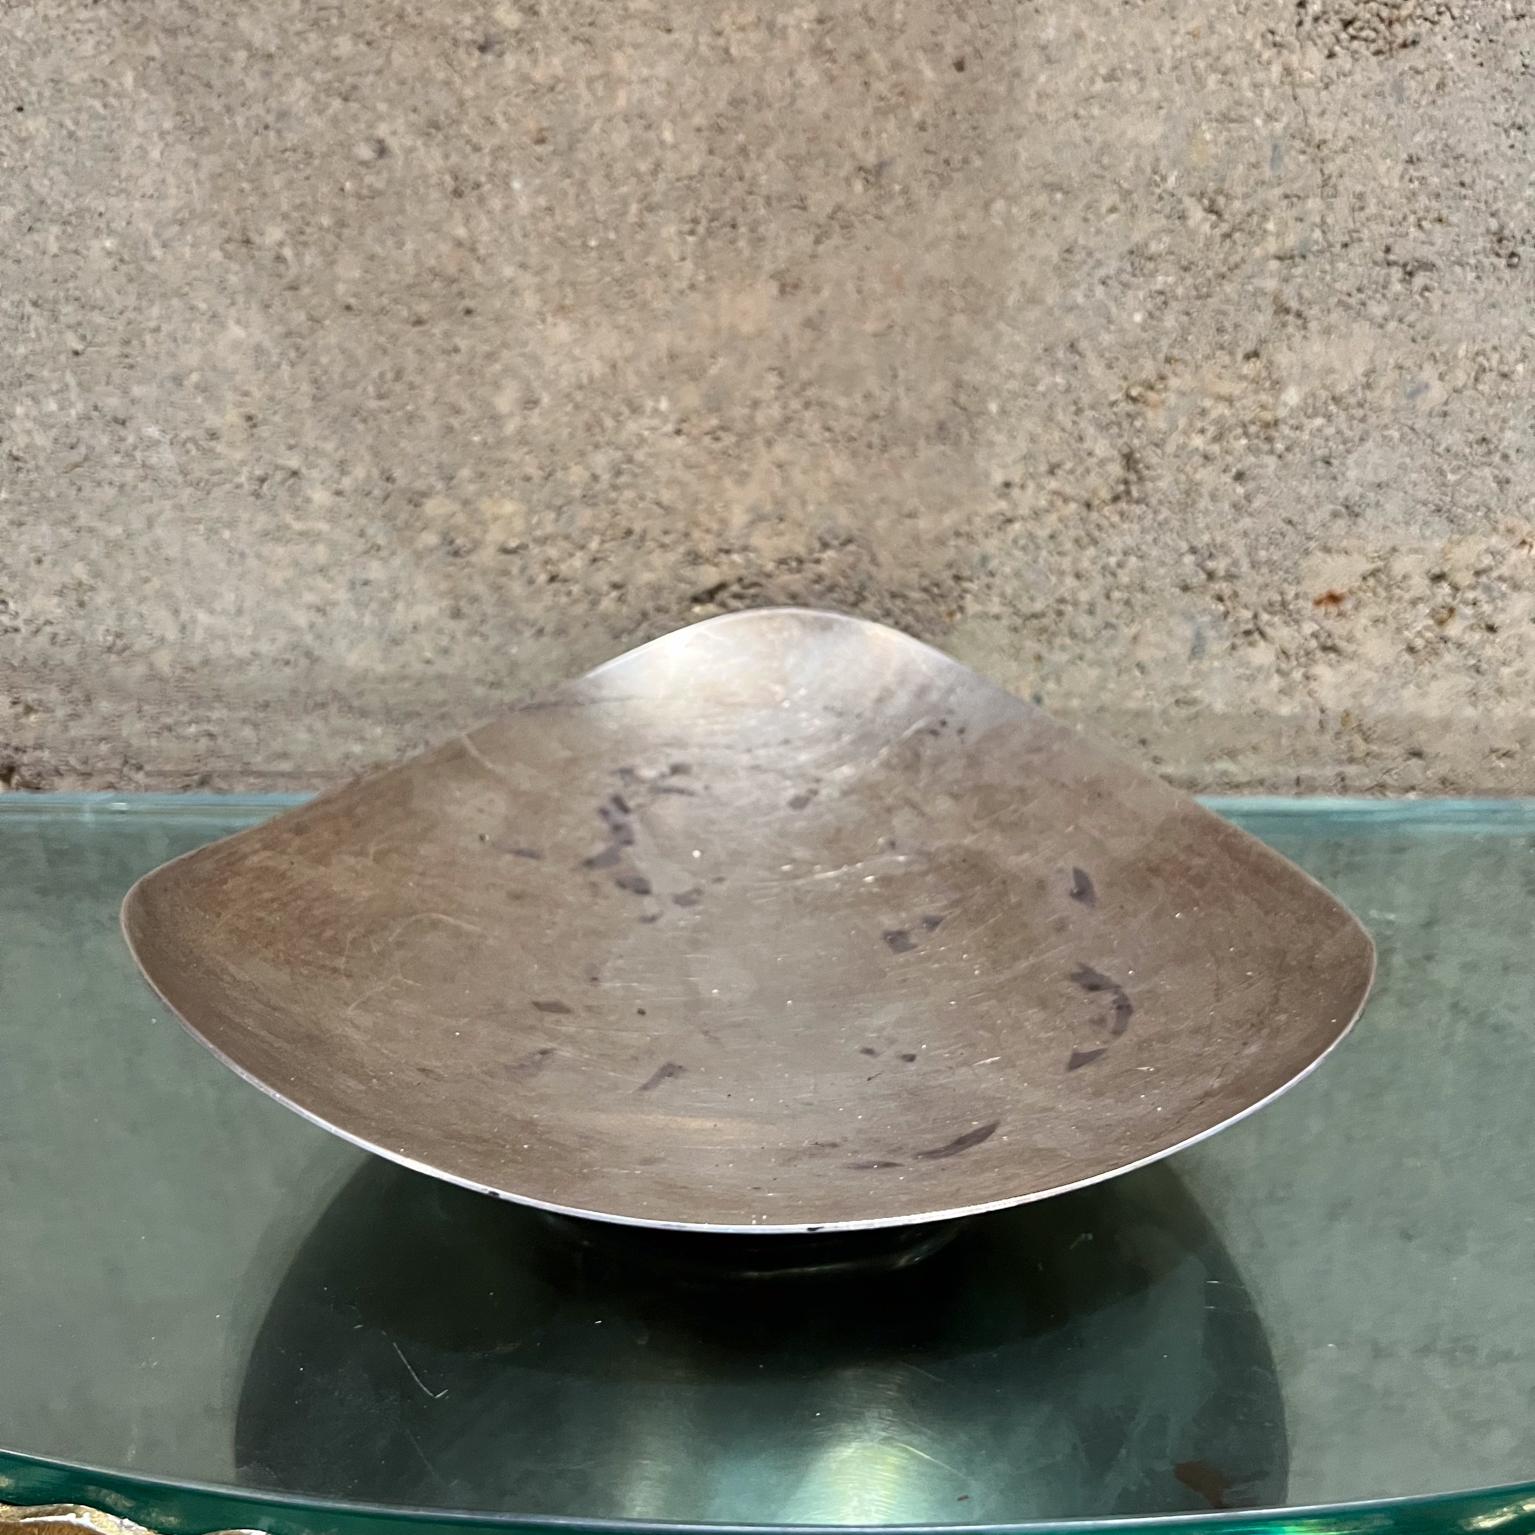 
1960s Silverplated Footed Serving Dish Modernist Round Triangle
Fisher stamped k85
8.5 diameter x 2.25 h
Unrestored original vintage condition
See images provided